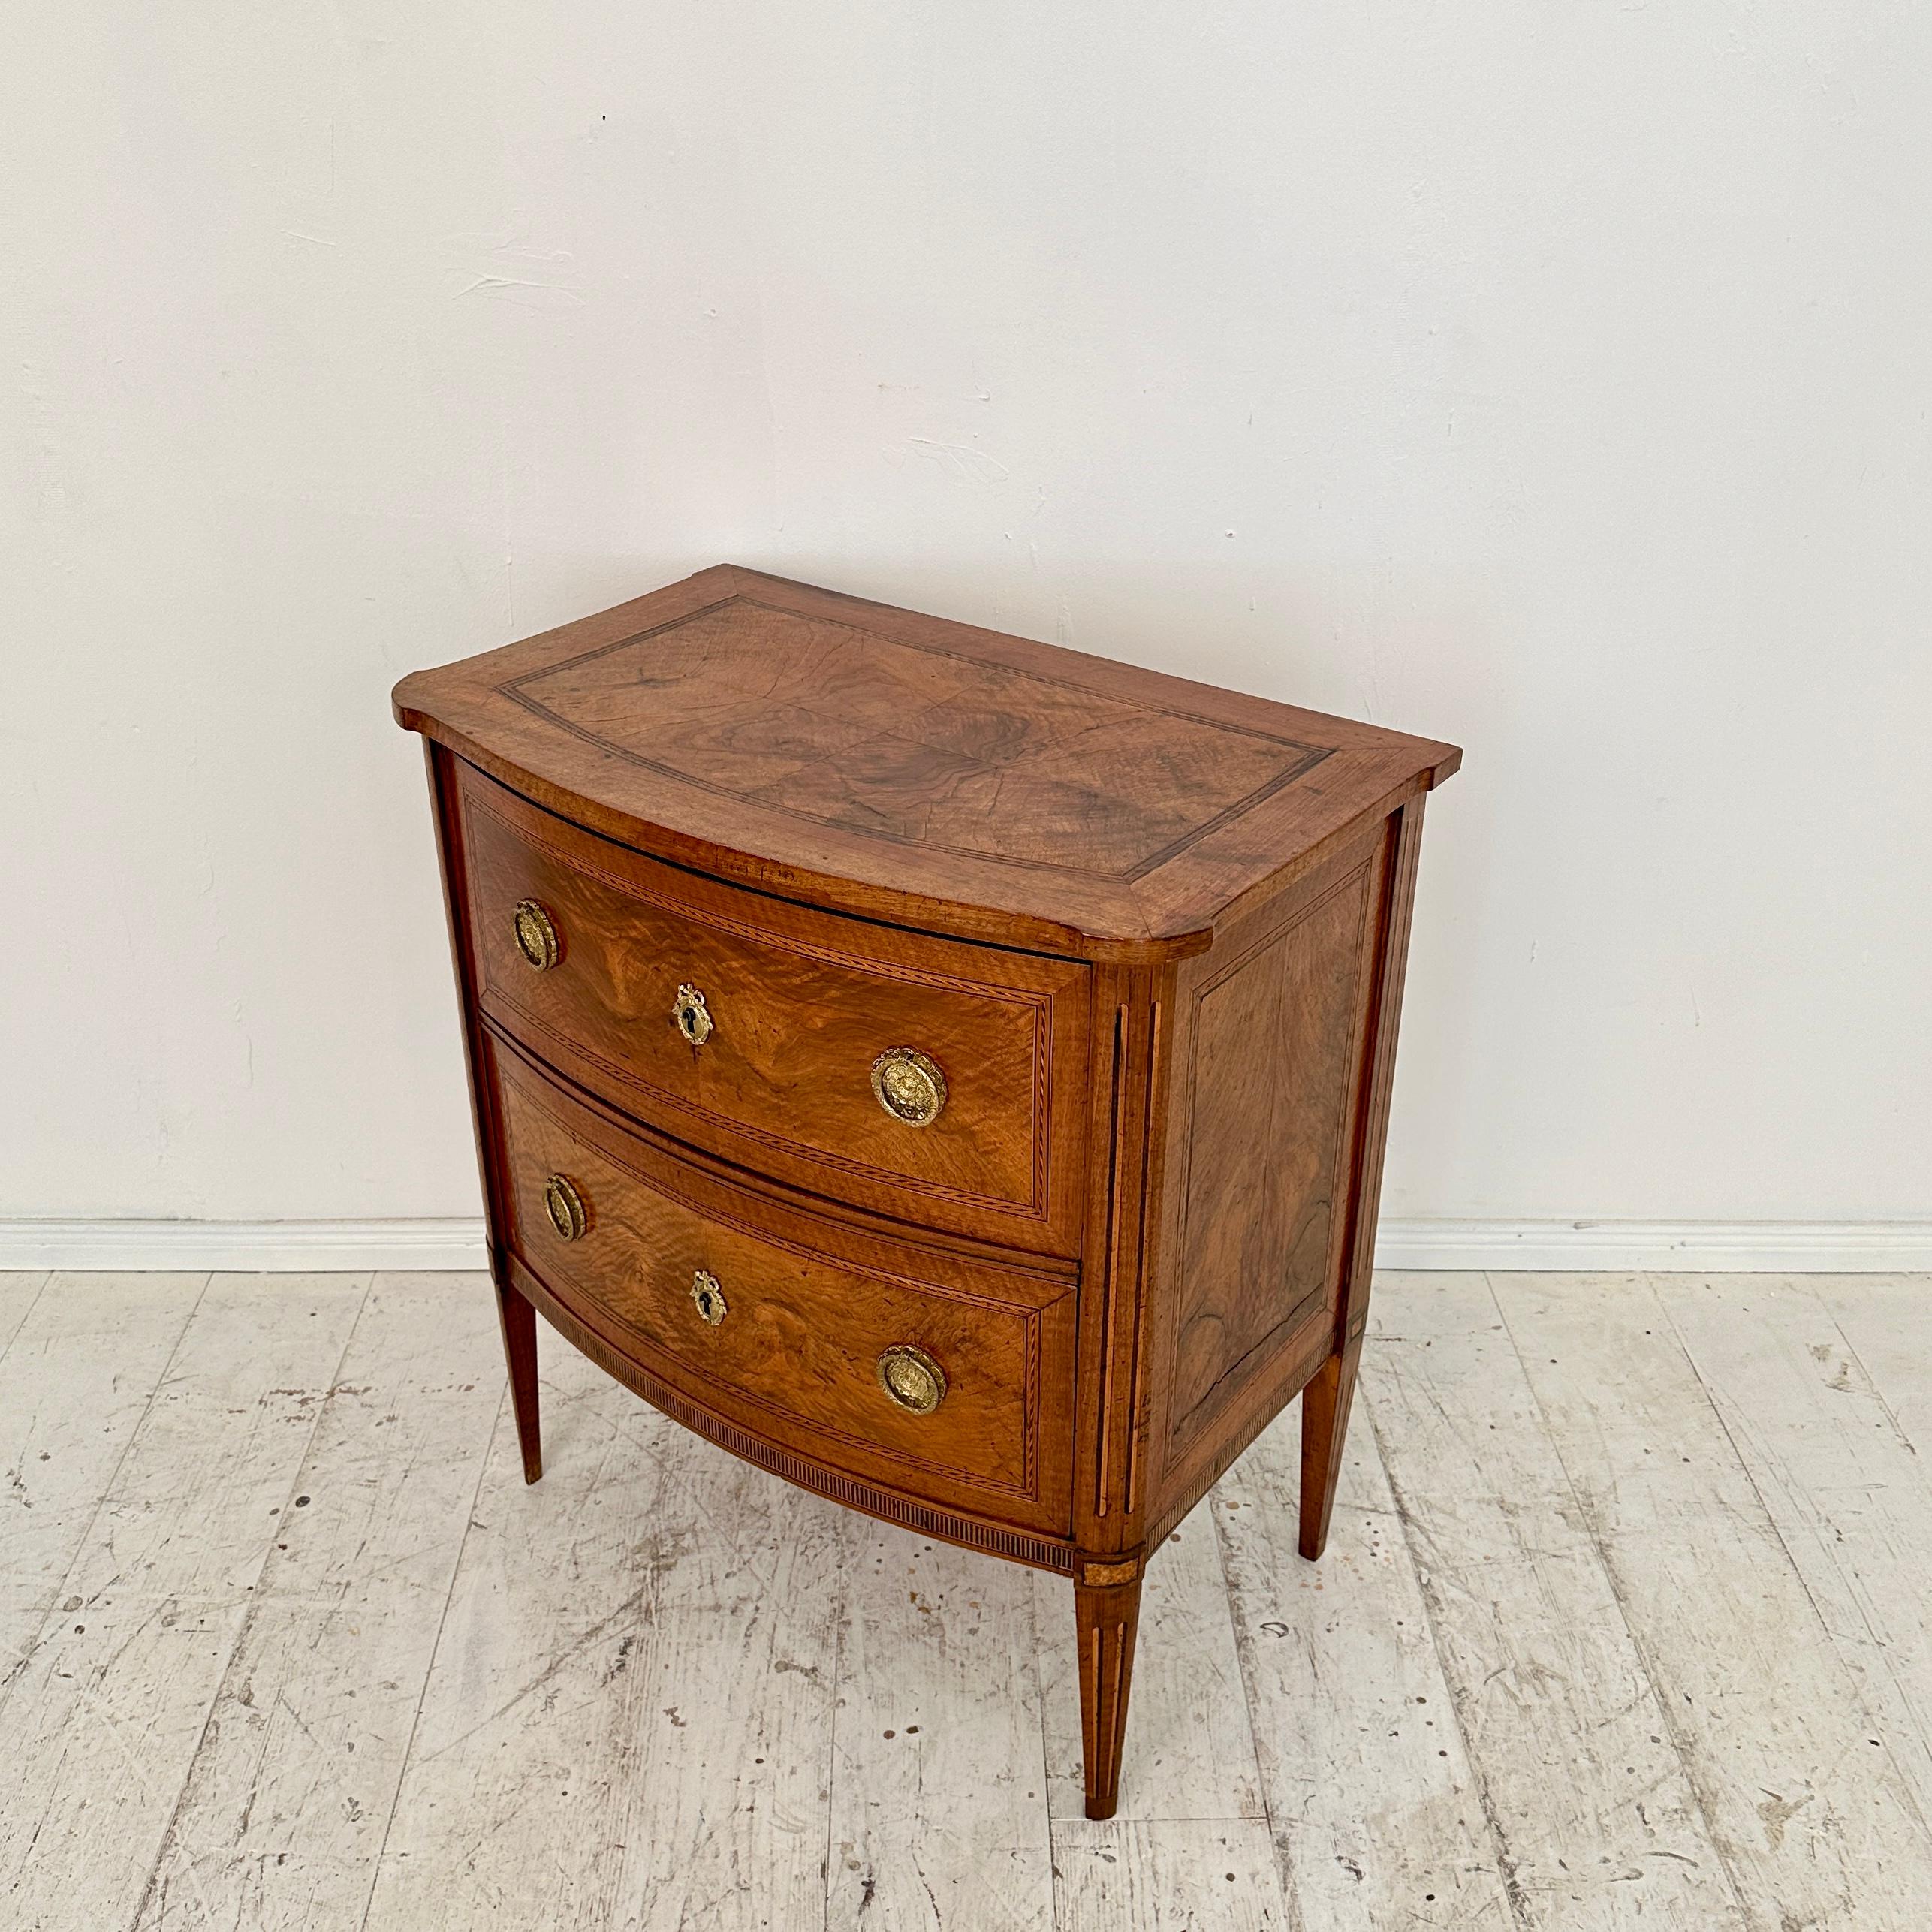 Cherry Small 18th Century German Louis Seize Commode in Walnut with 2 Drawers, 1790 For Sale